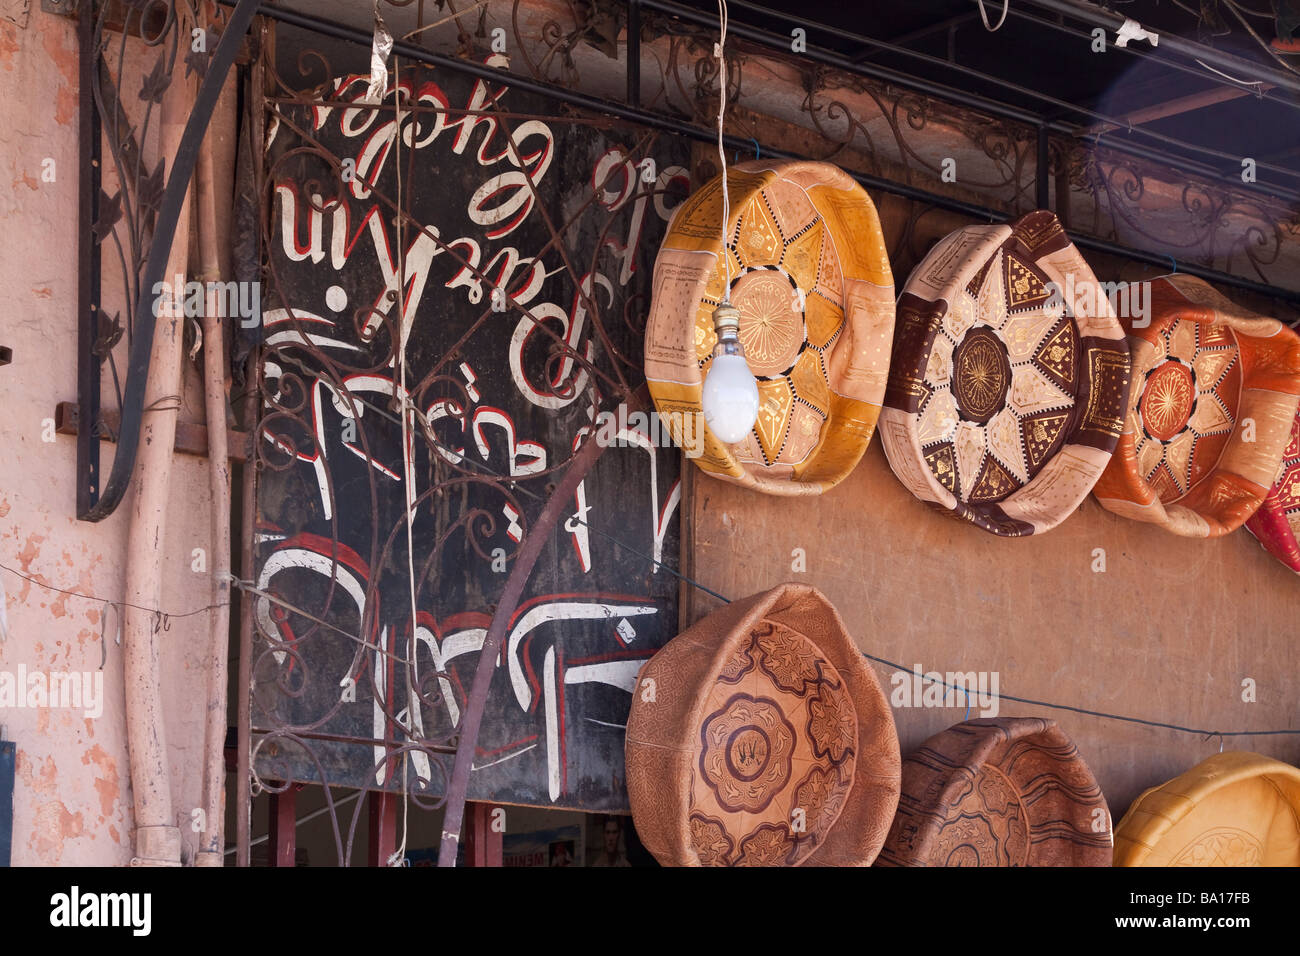 Traditional islamic patterned leather goods and crafts for sale on the exterior of a stall near the place Jemaa El Fna Stock Photo